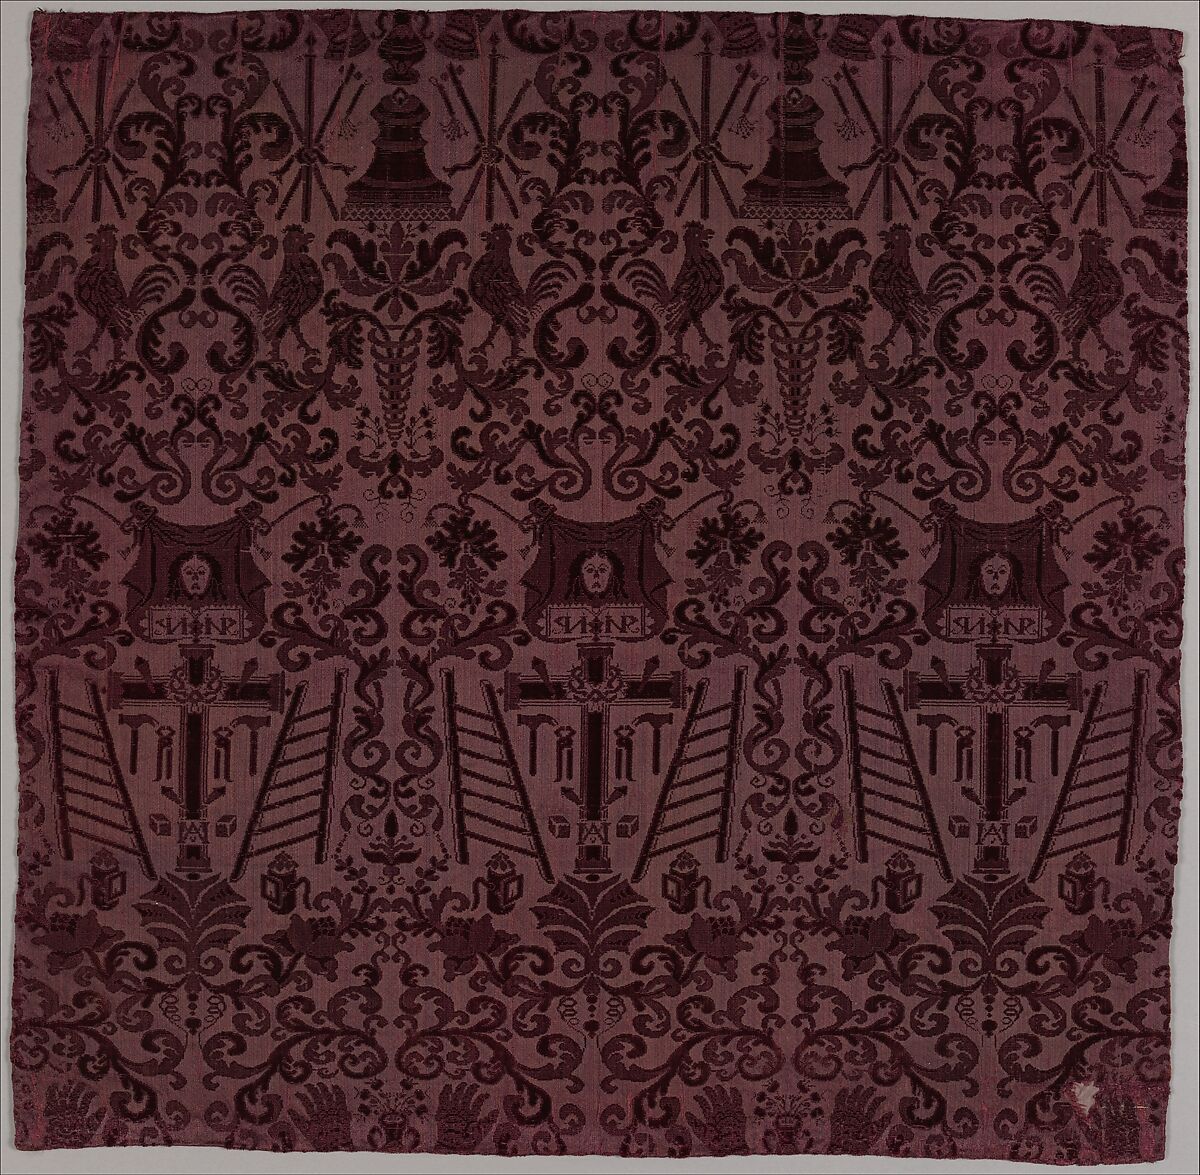 Length of velvet with Instruments of the Passion, Silk, possibly Spanish 